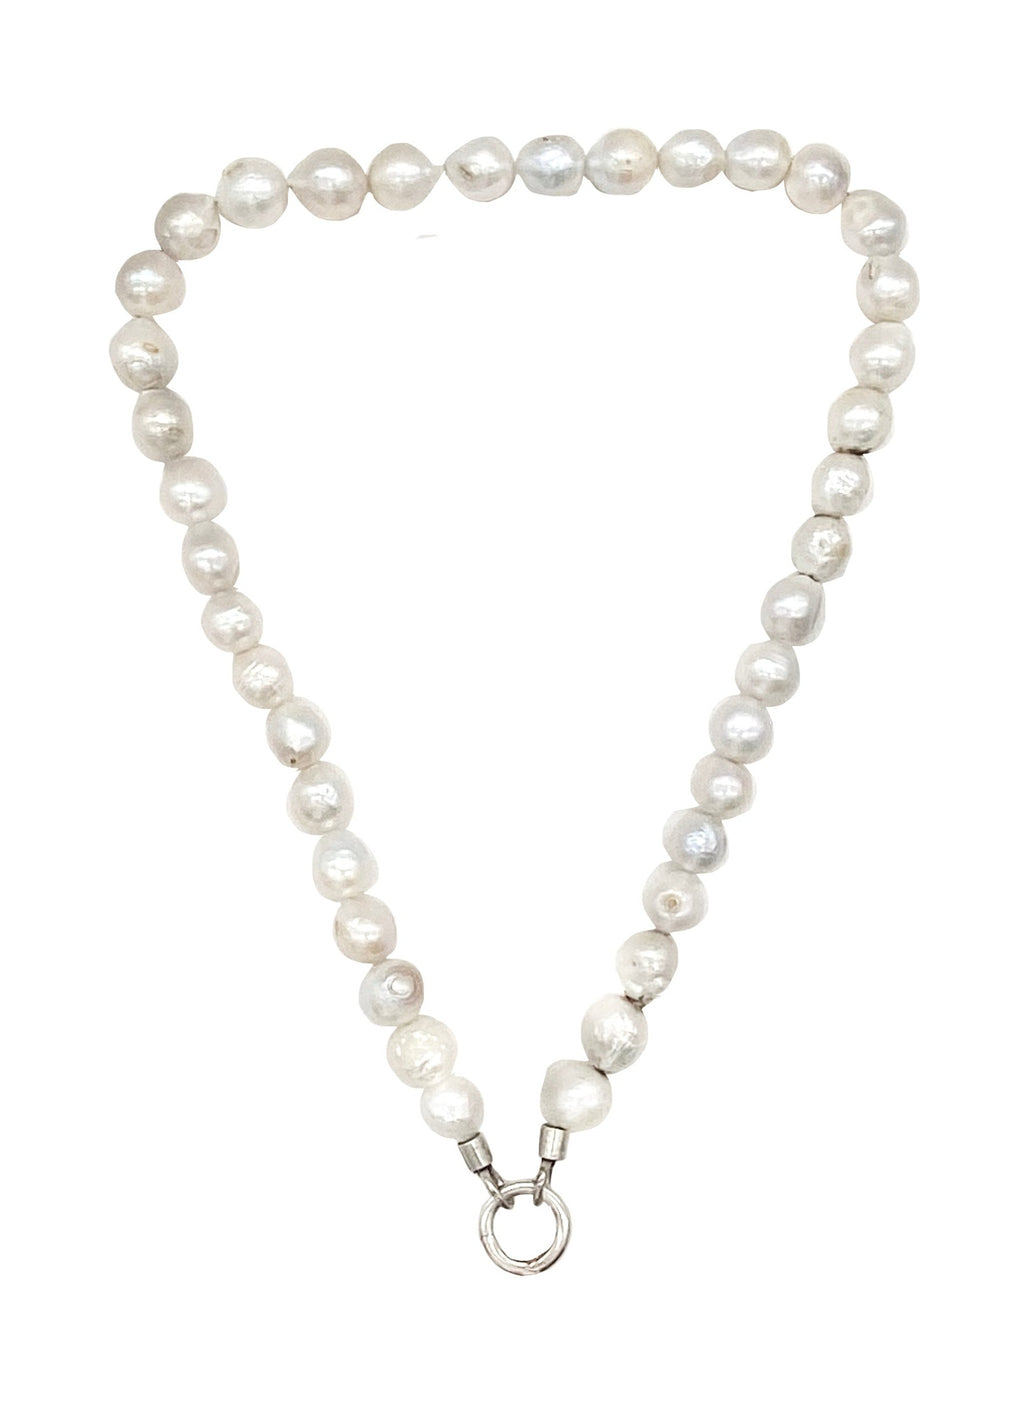 Baroque Pearl Charm Necklace